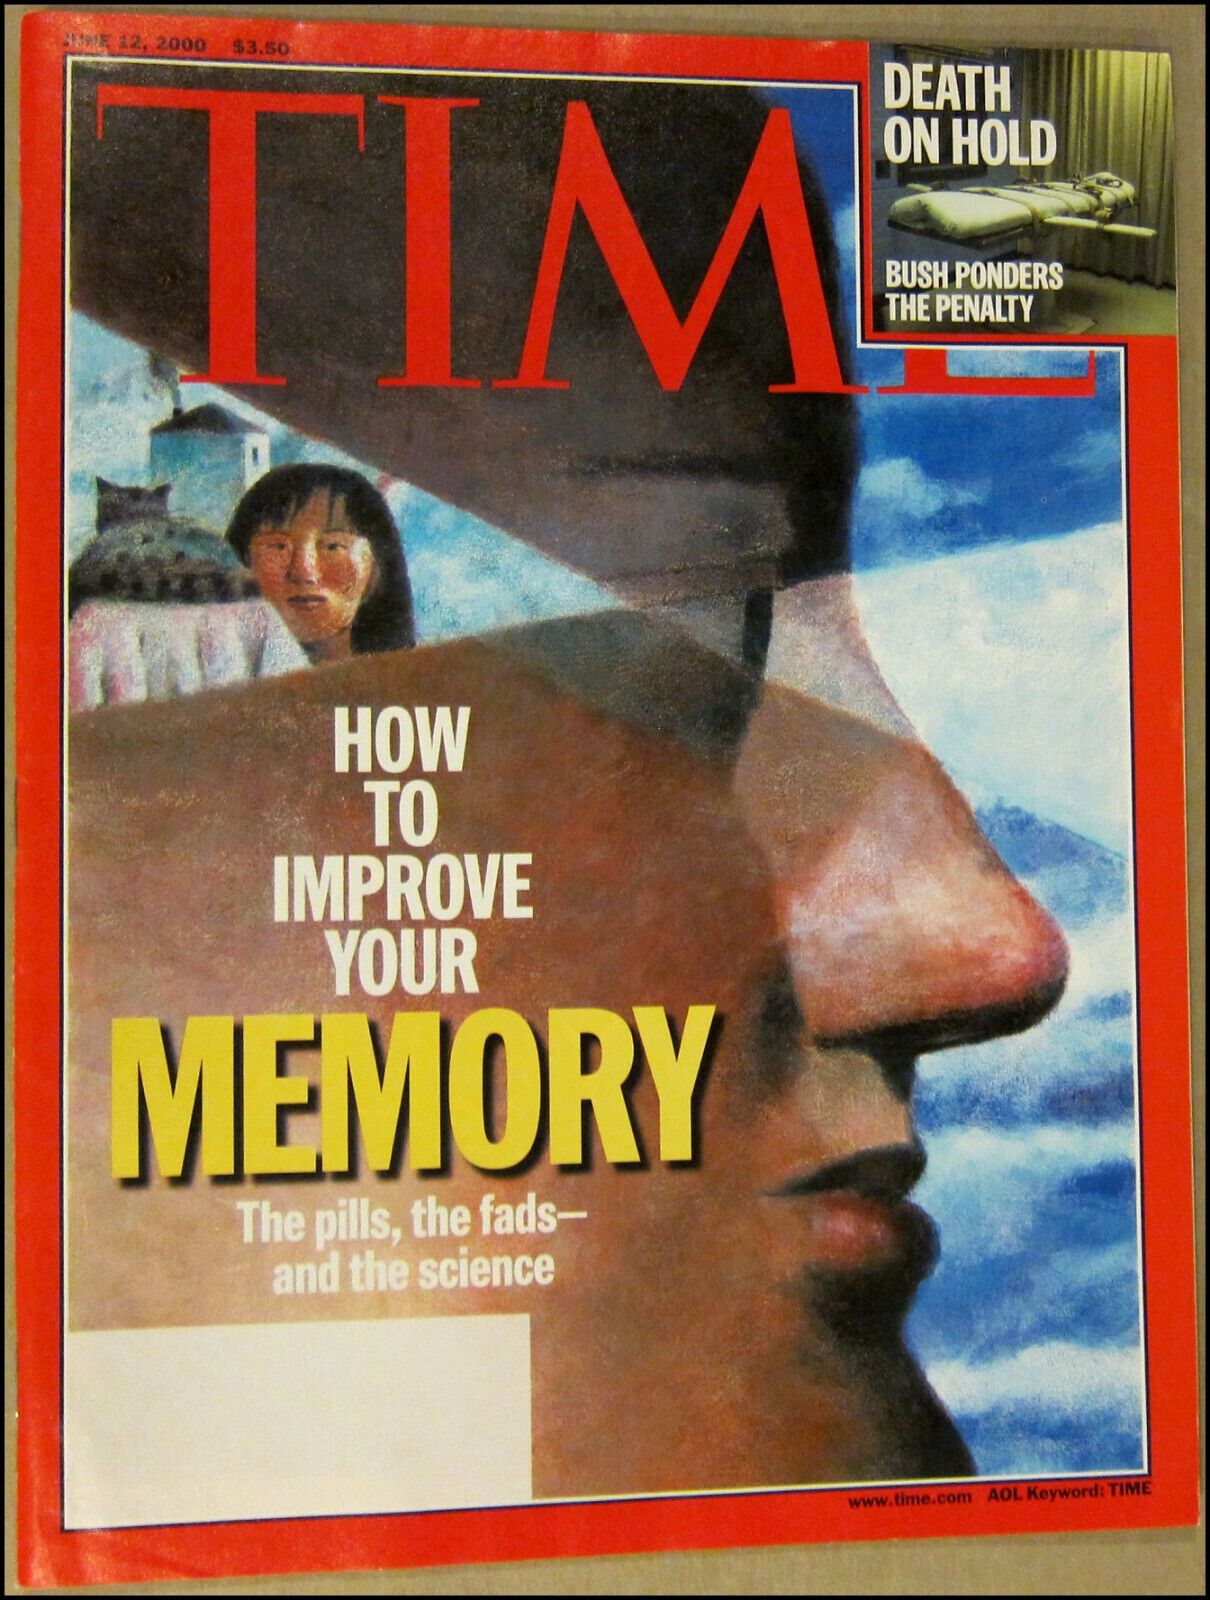 6/12/2000 Time Magazine How To Improve Your Memory Death Penalty George W. Bush